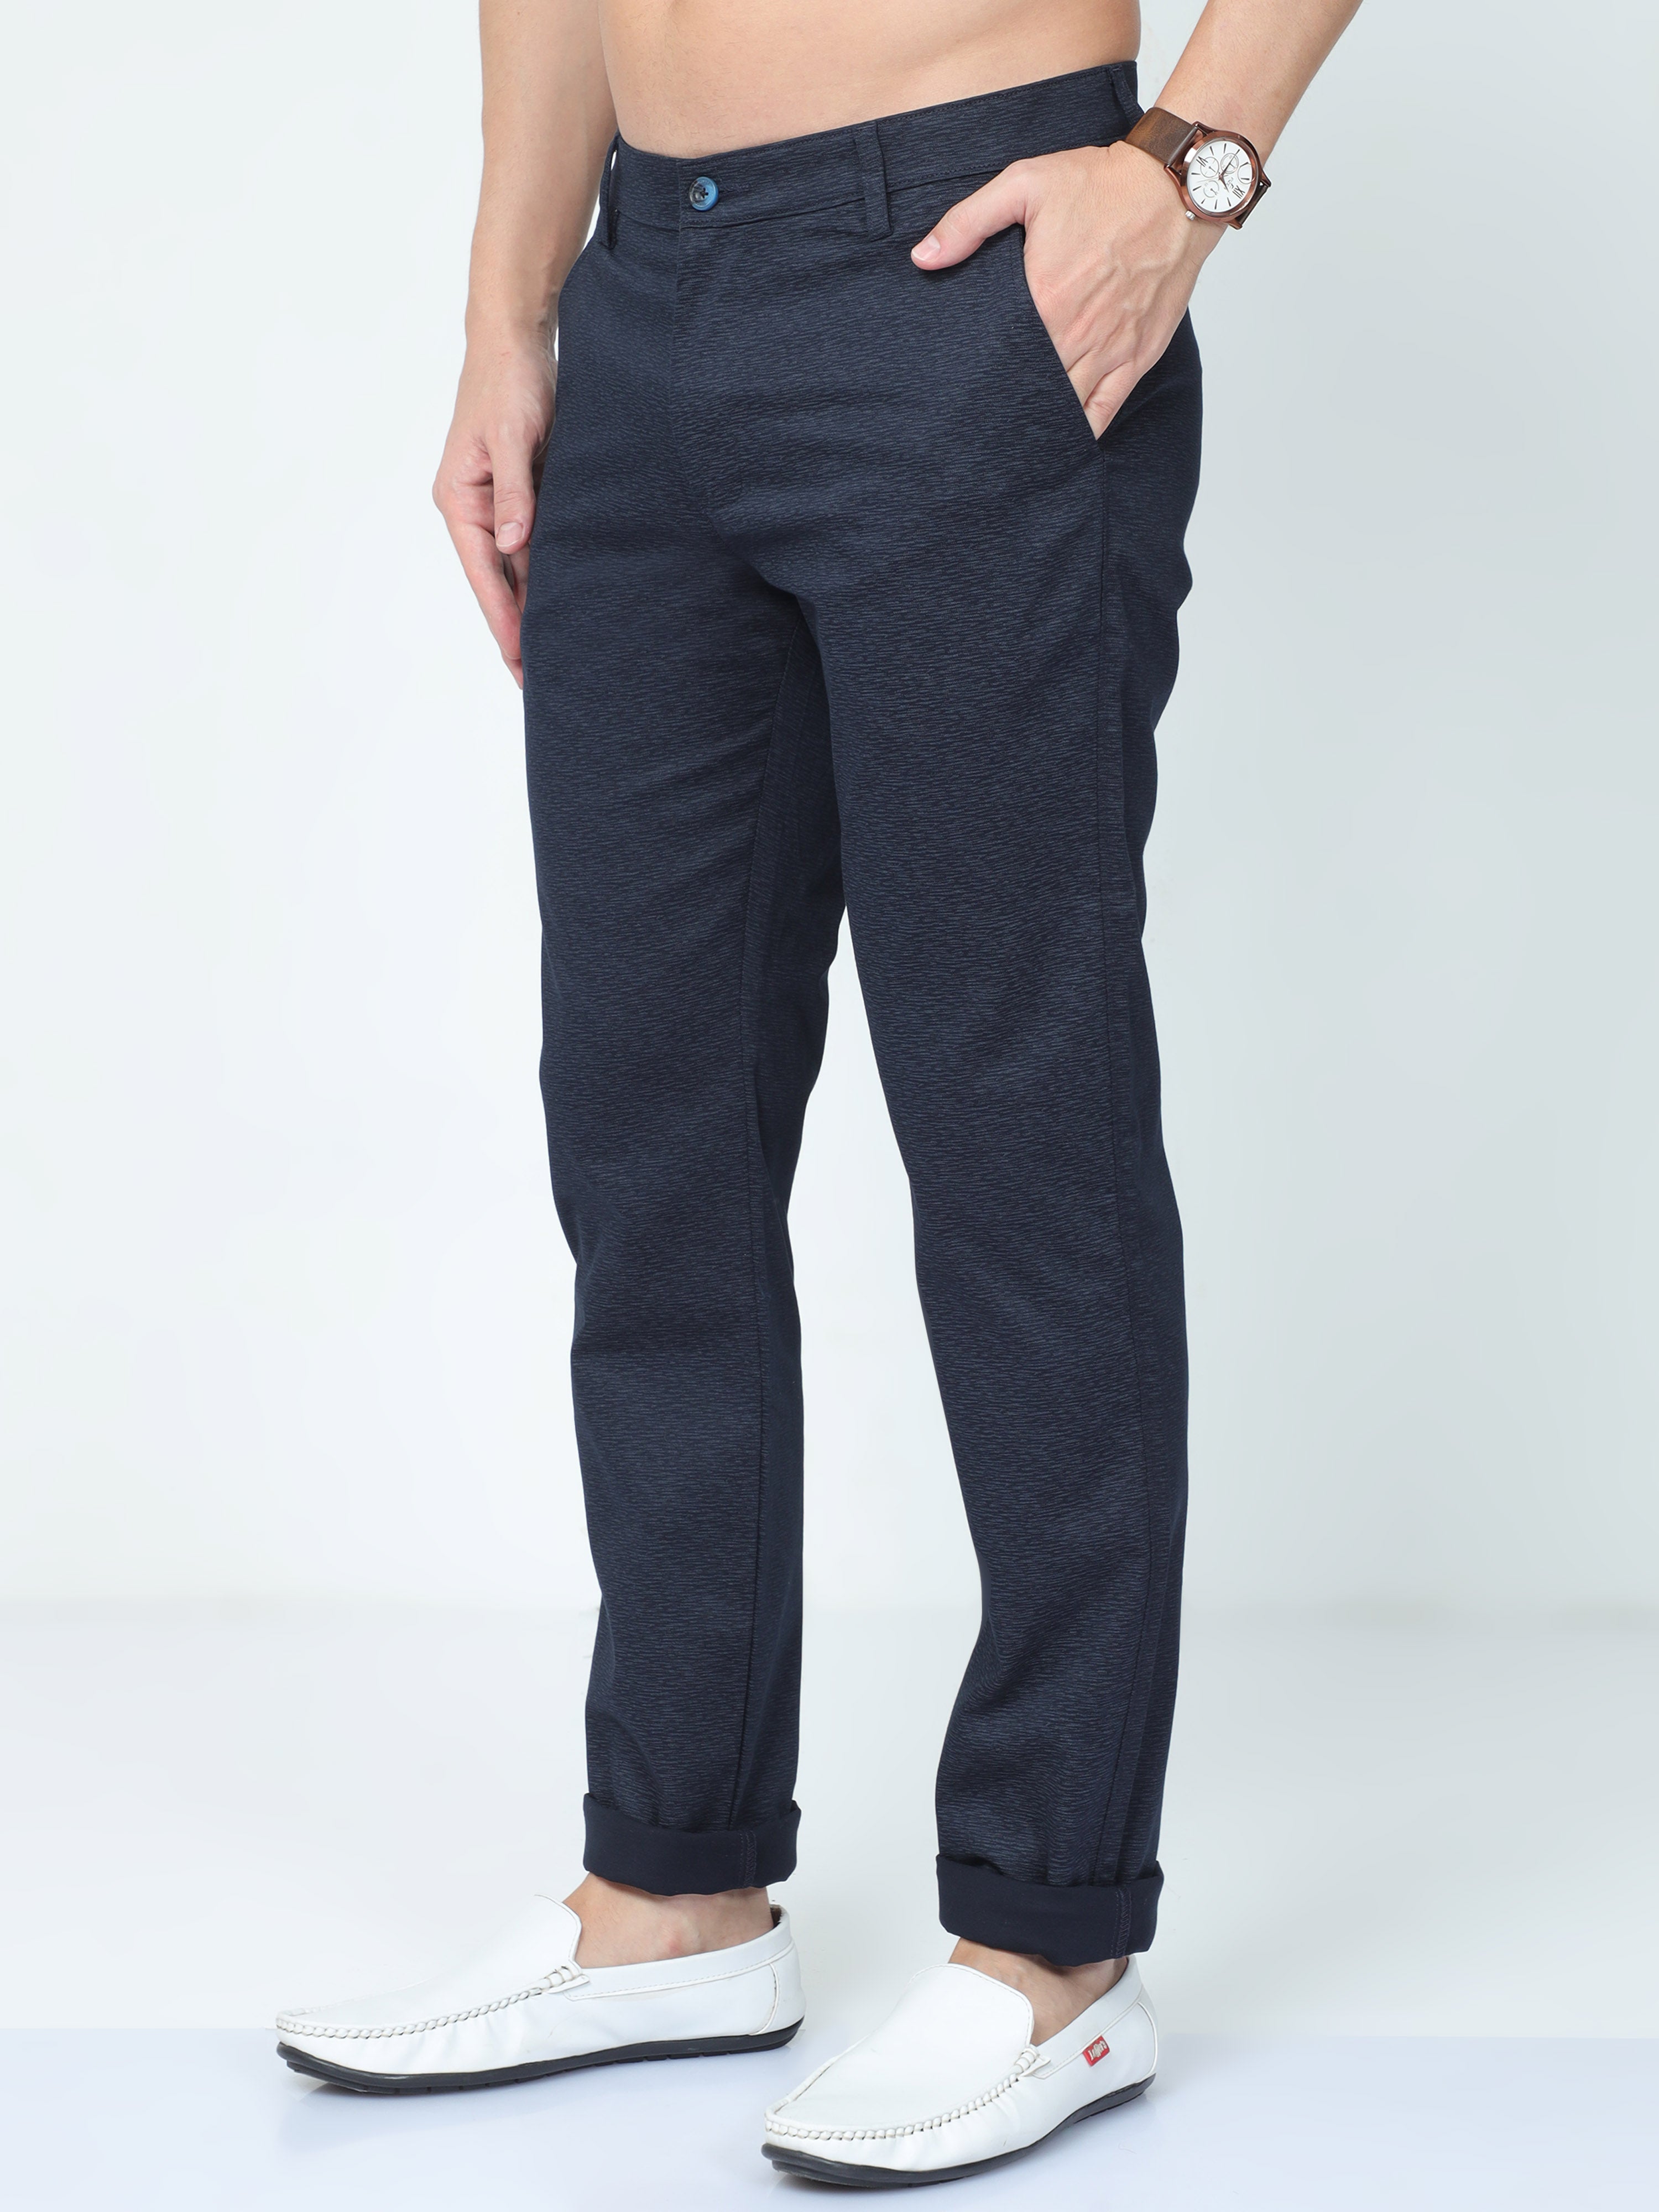 CP BRO Mens Ankle Fit Solid Navy Color Trousers | Tbo2-01 D-Nvy-Af-Ly